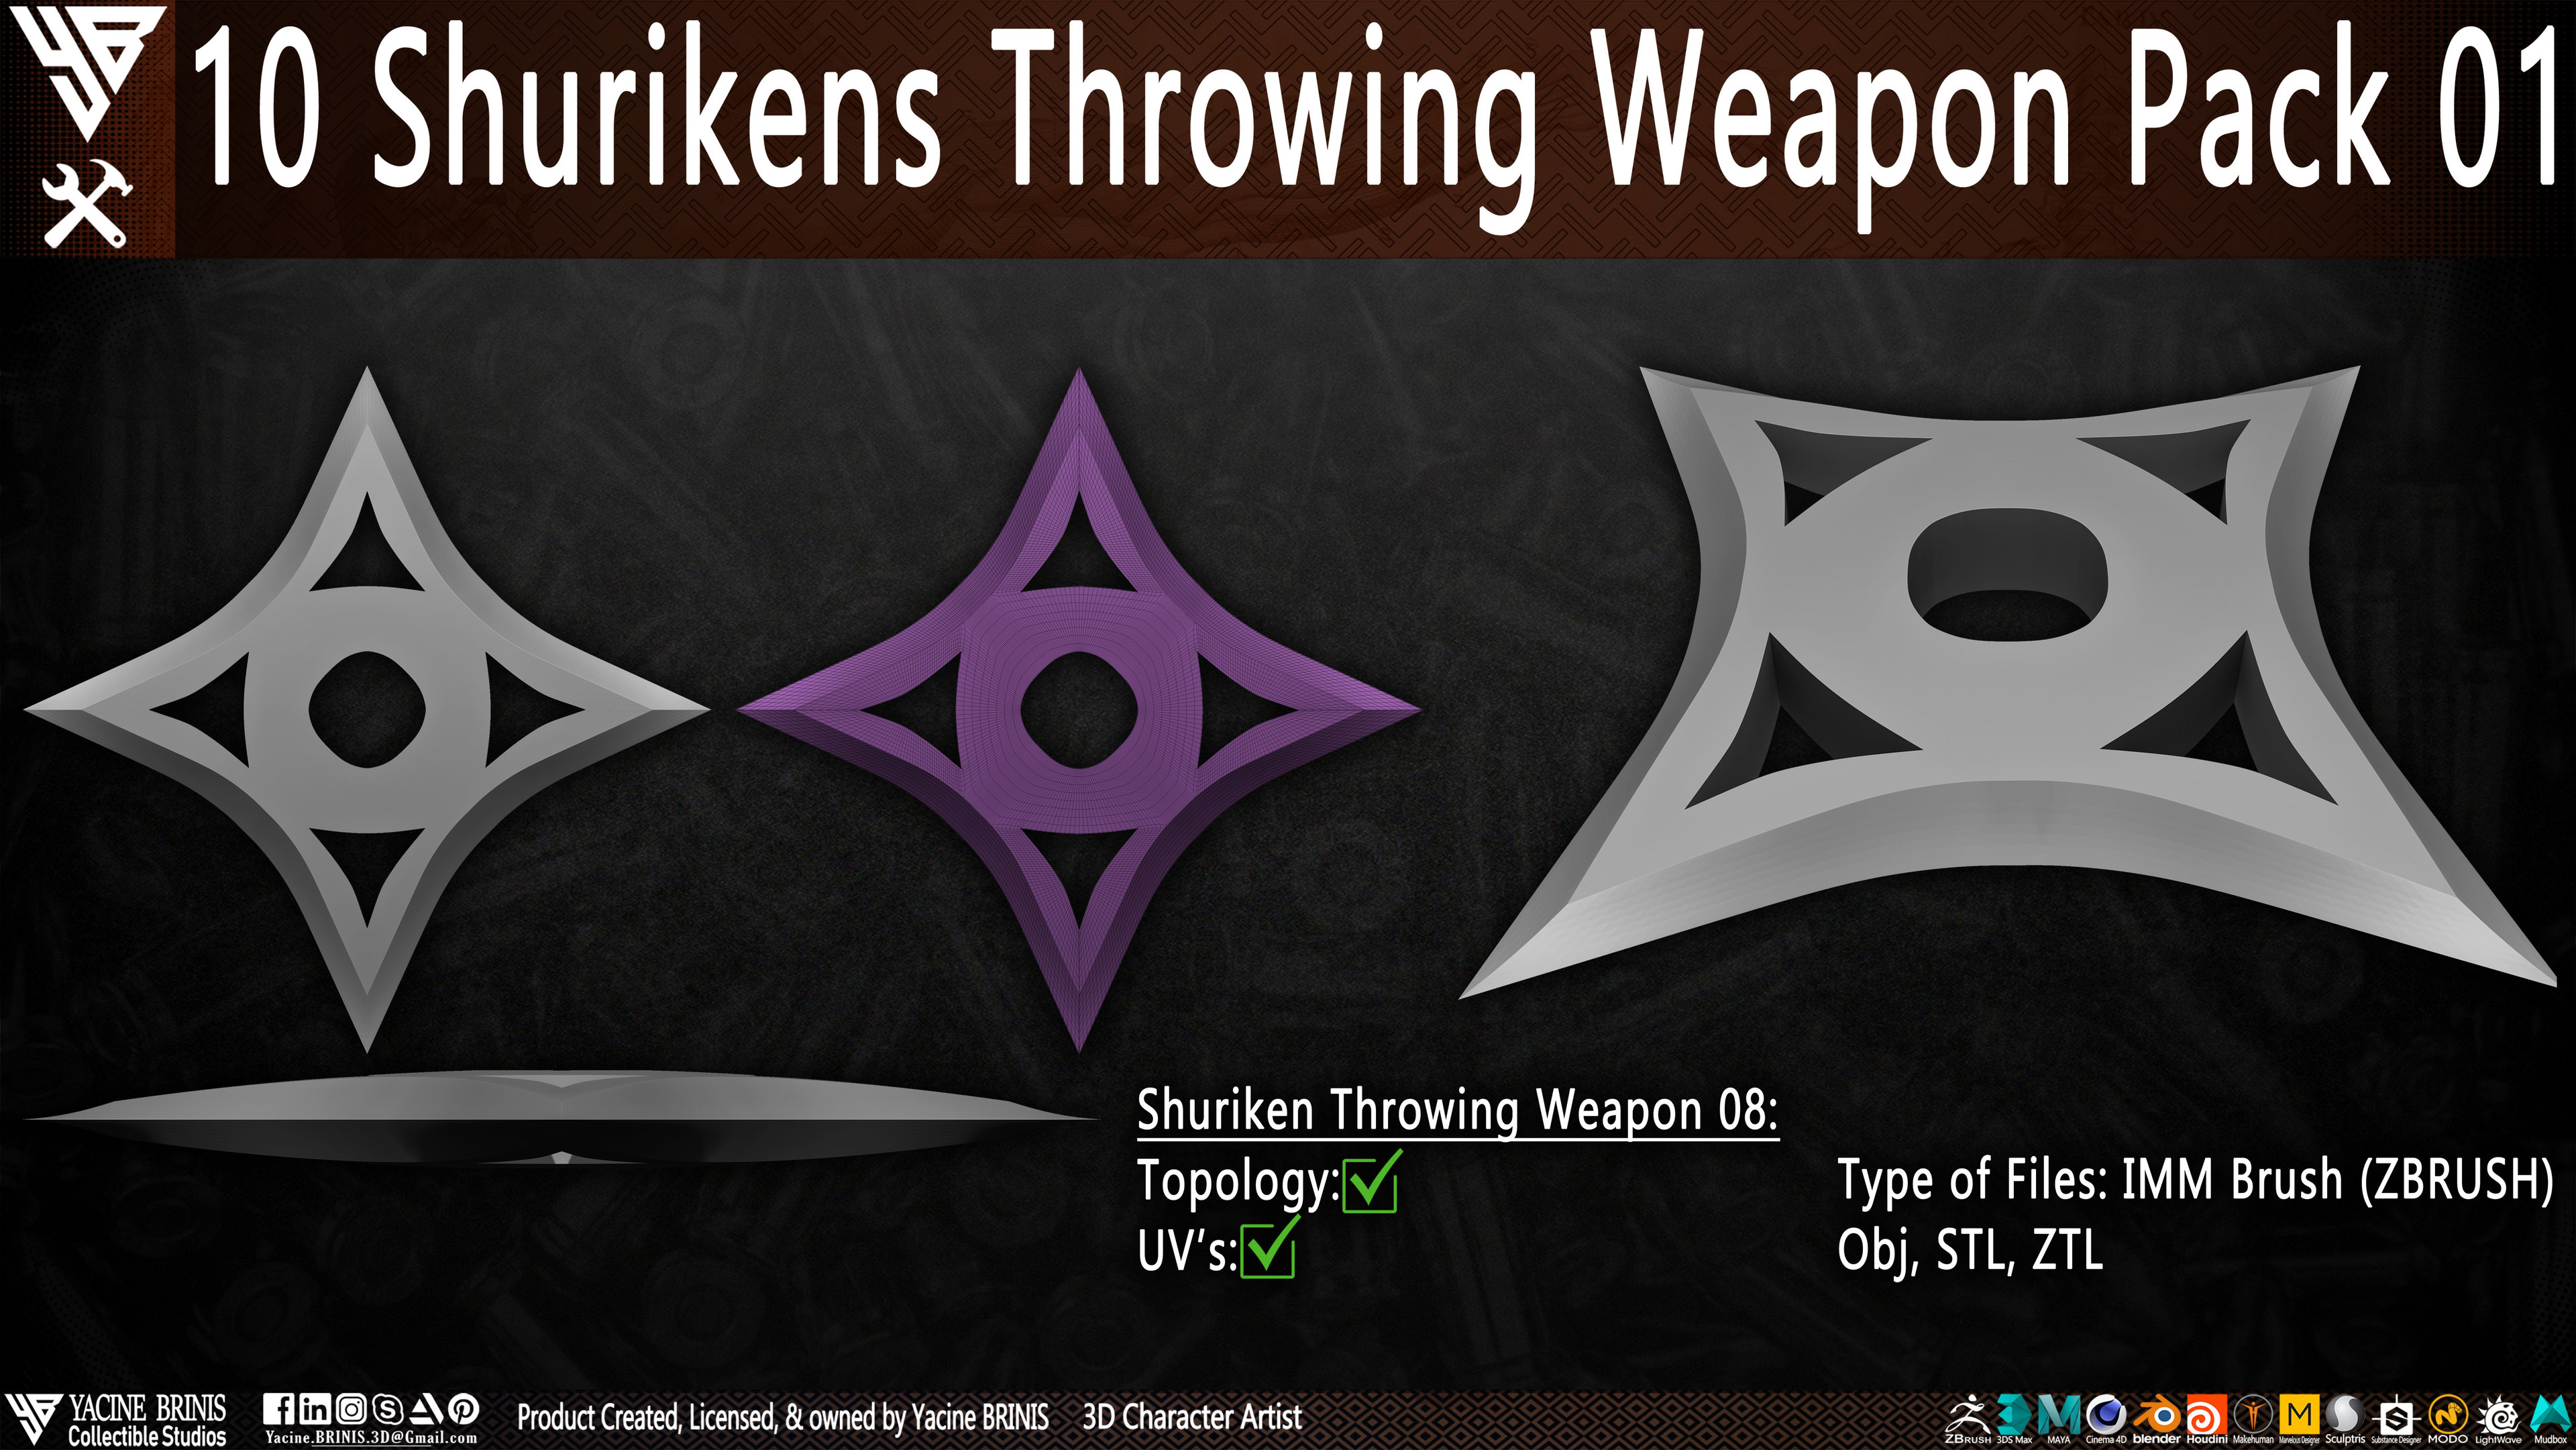 10 Shurikens Throwing Weapon Pack 01 sculpted by Yacine BRINIS Set 11